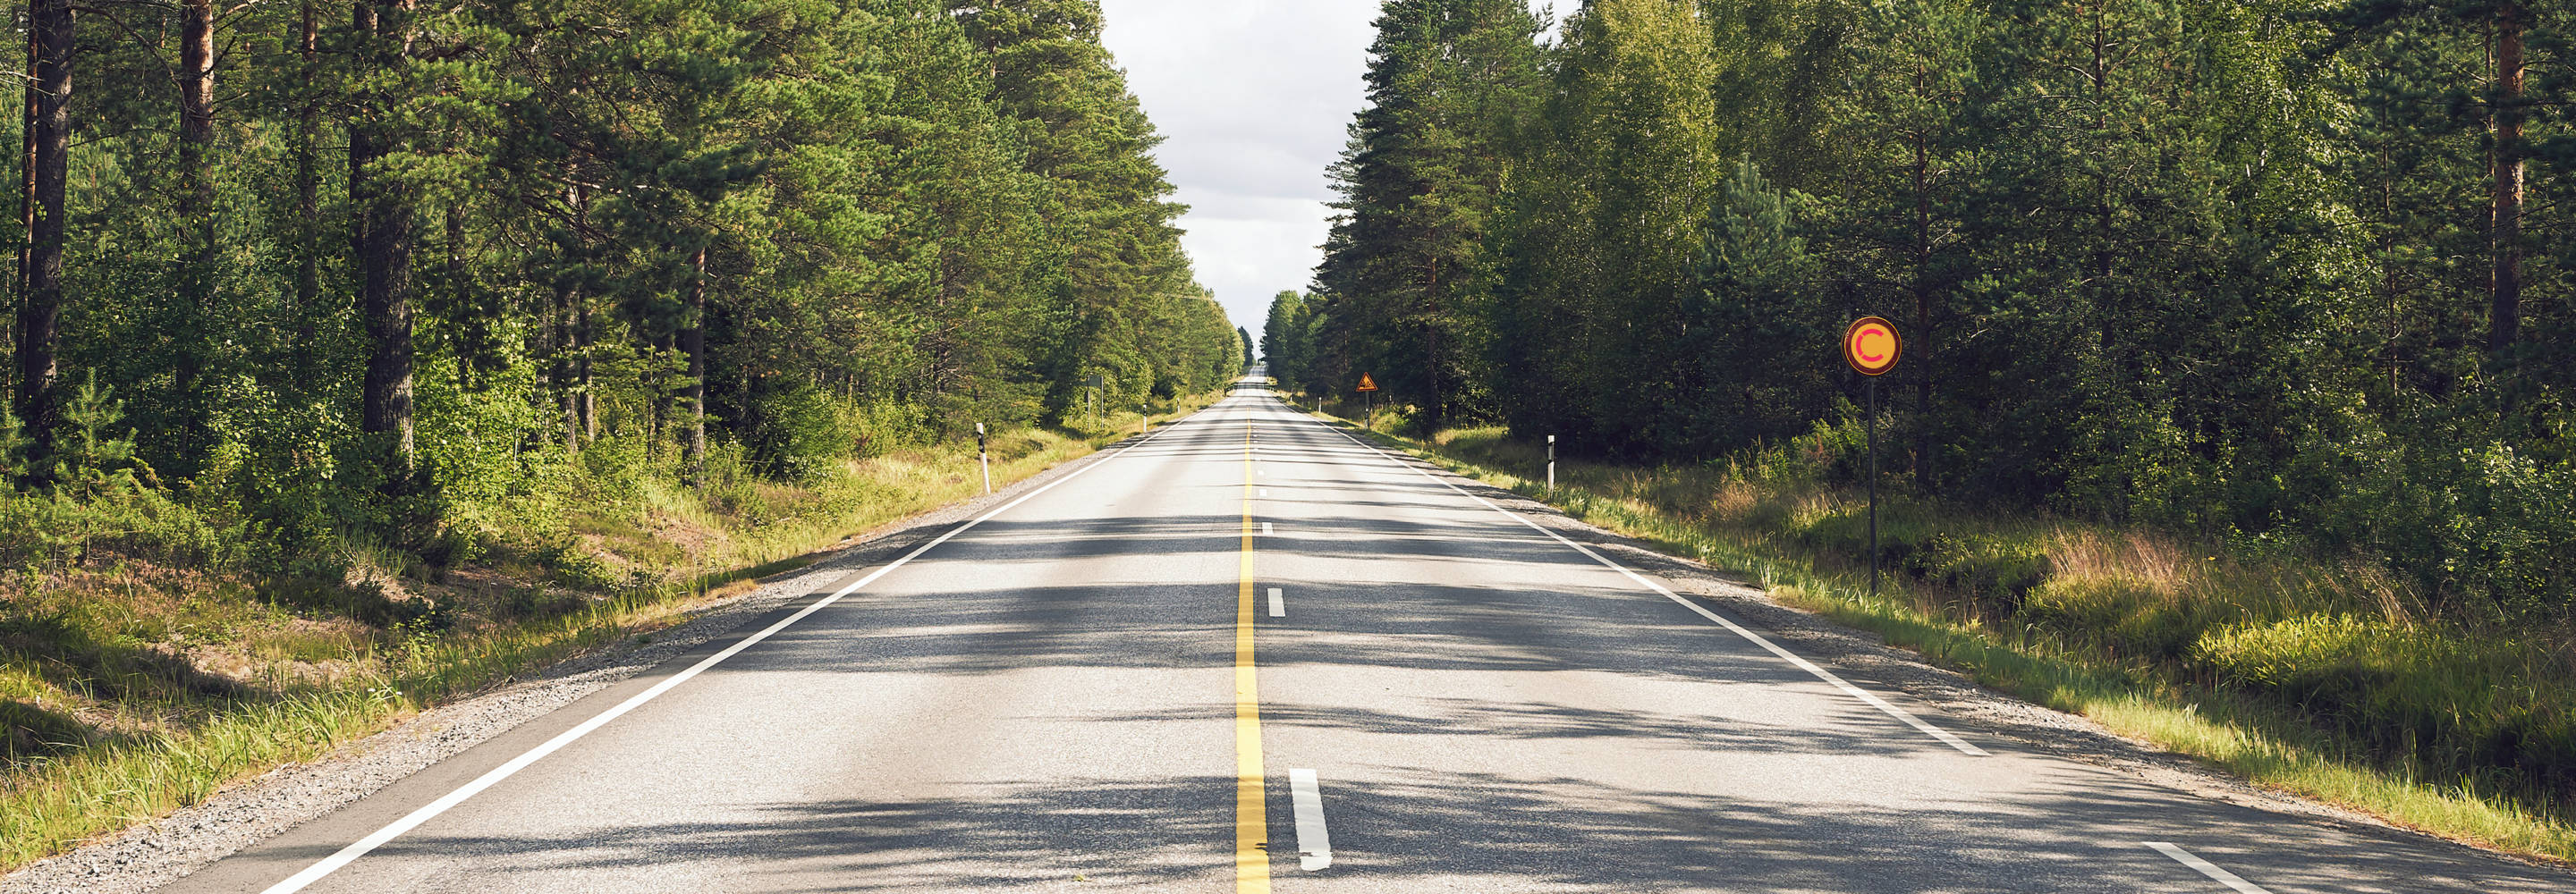 Finnish road surrounded by forest